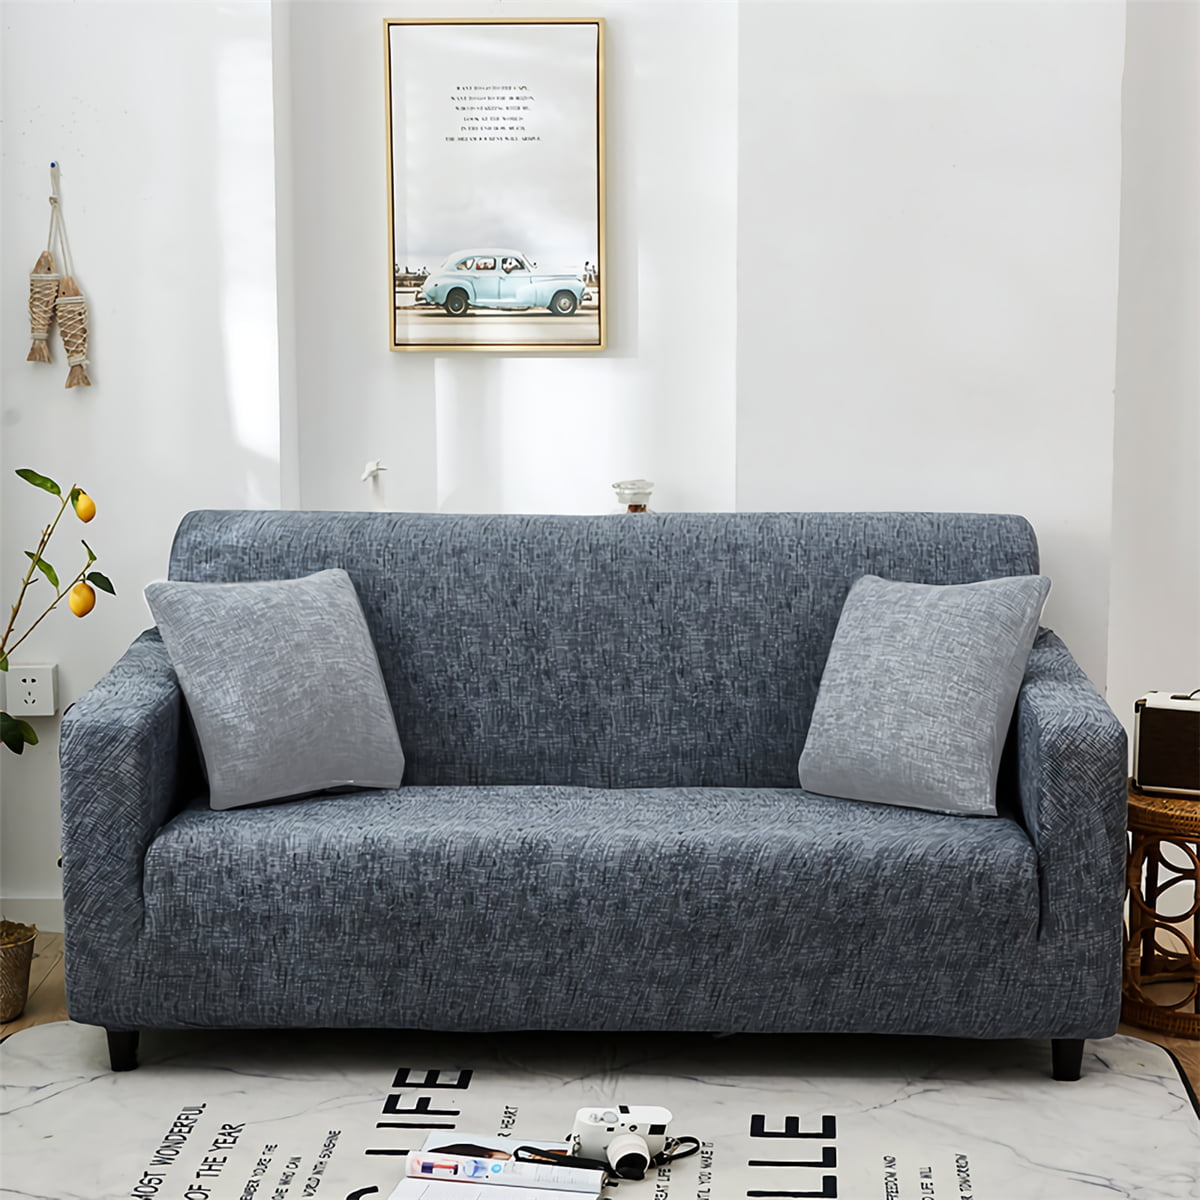 Details about   Sofa Cover Protector Modern Polyester Fiber Slipcover Couch Cover Supplies For . 